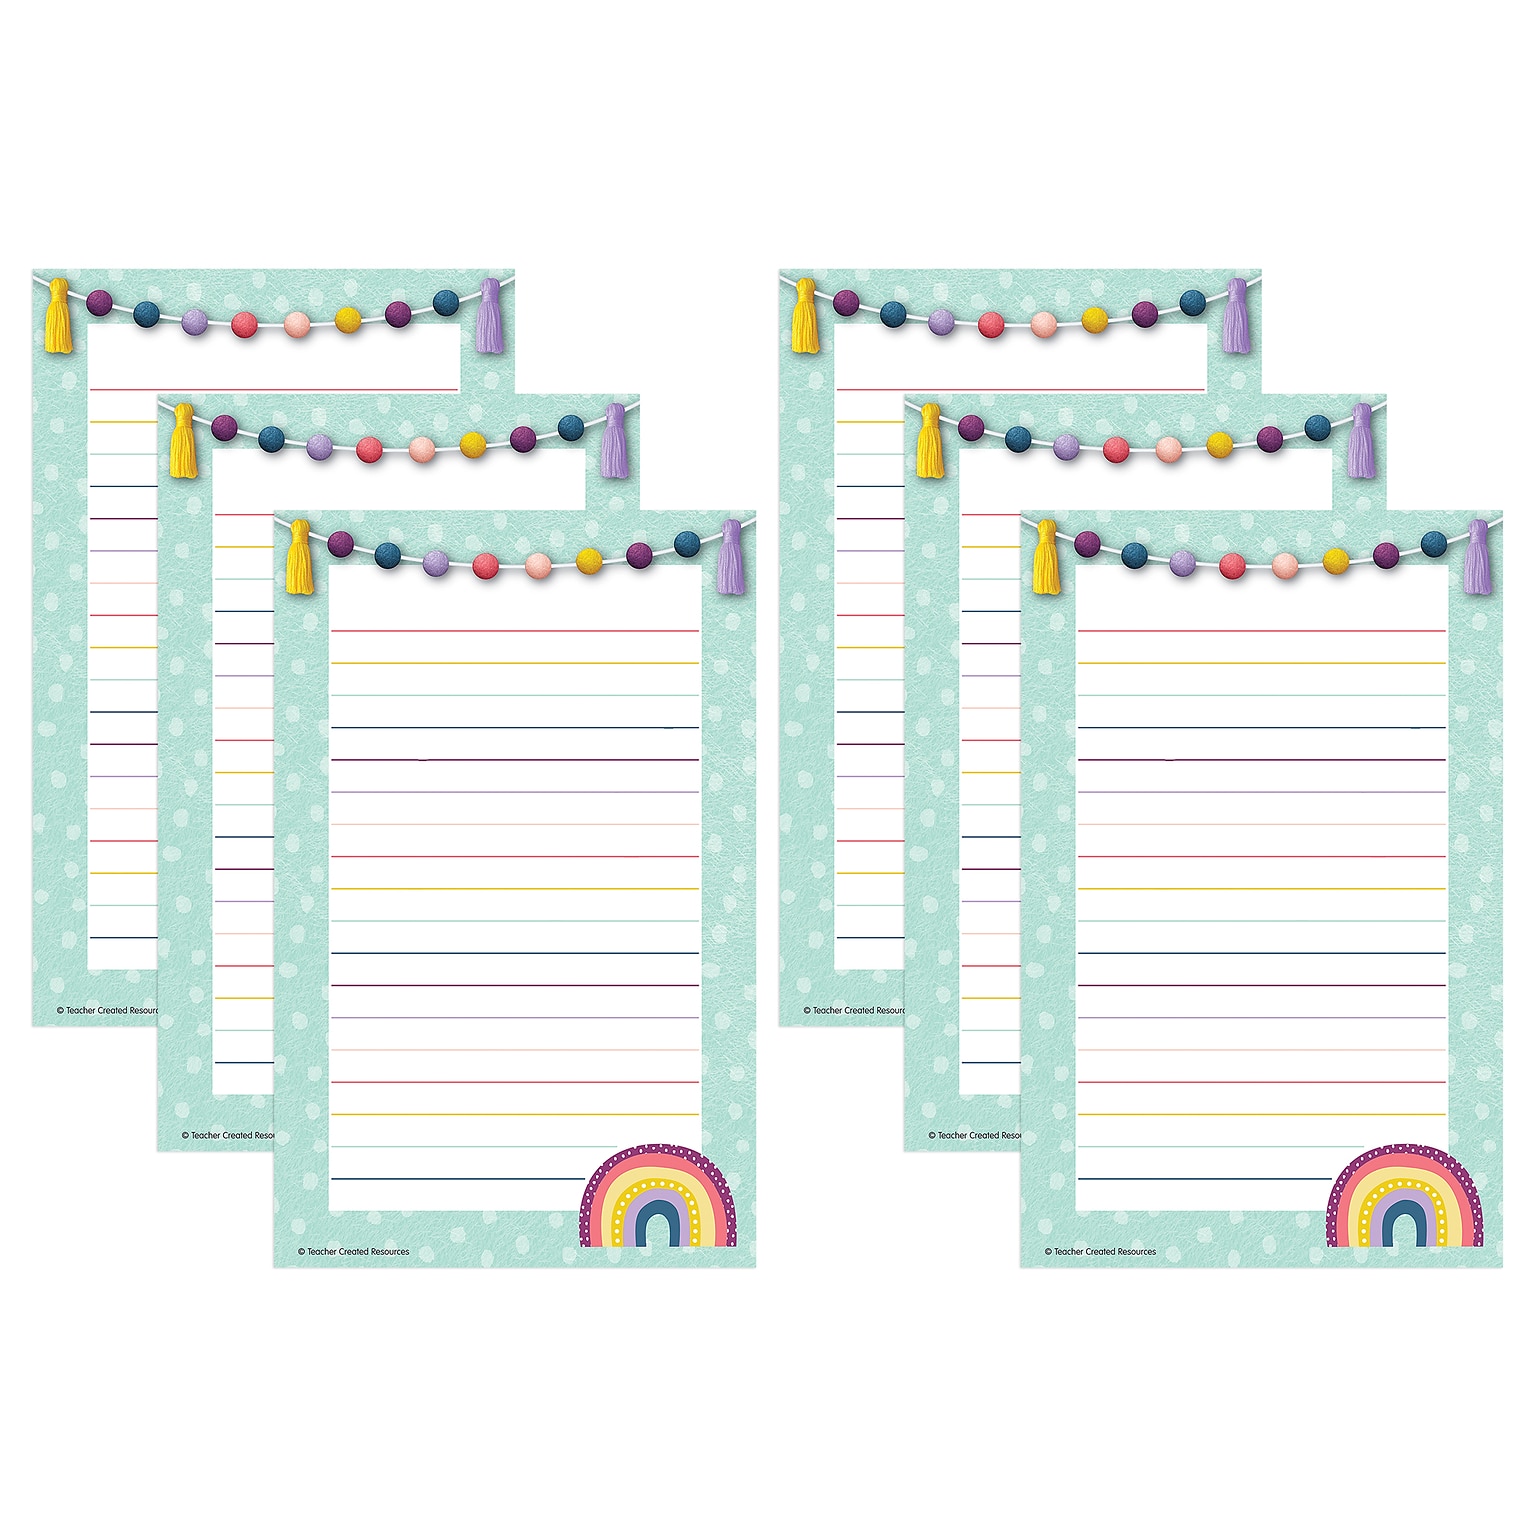 Teacher Created Resources® Oh Happy Day Notepad, 5.25 x 8.25, 50 Sheets Per Pack, Pack of 6 (TCR9019-6)